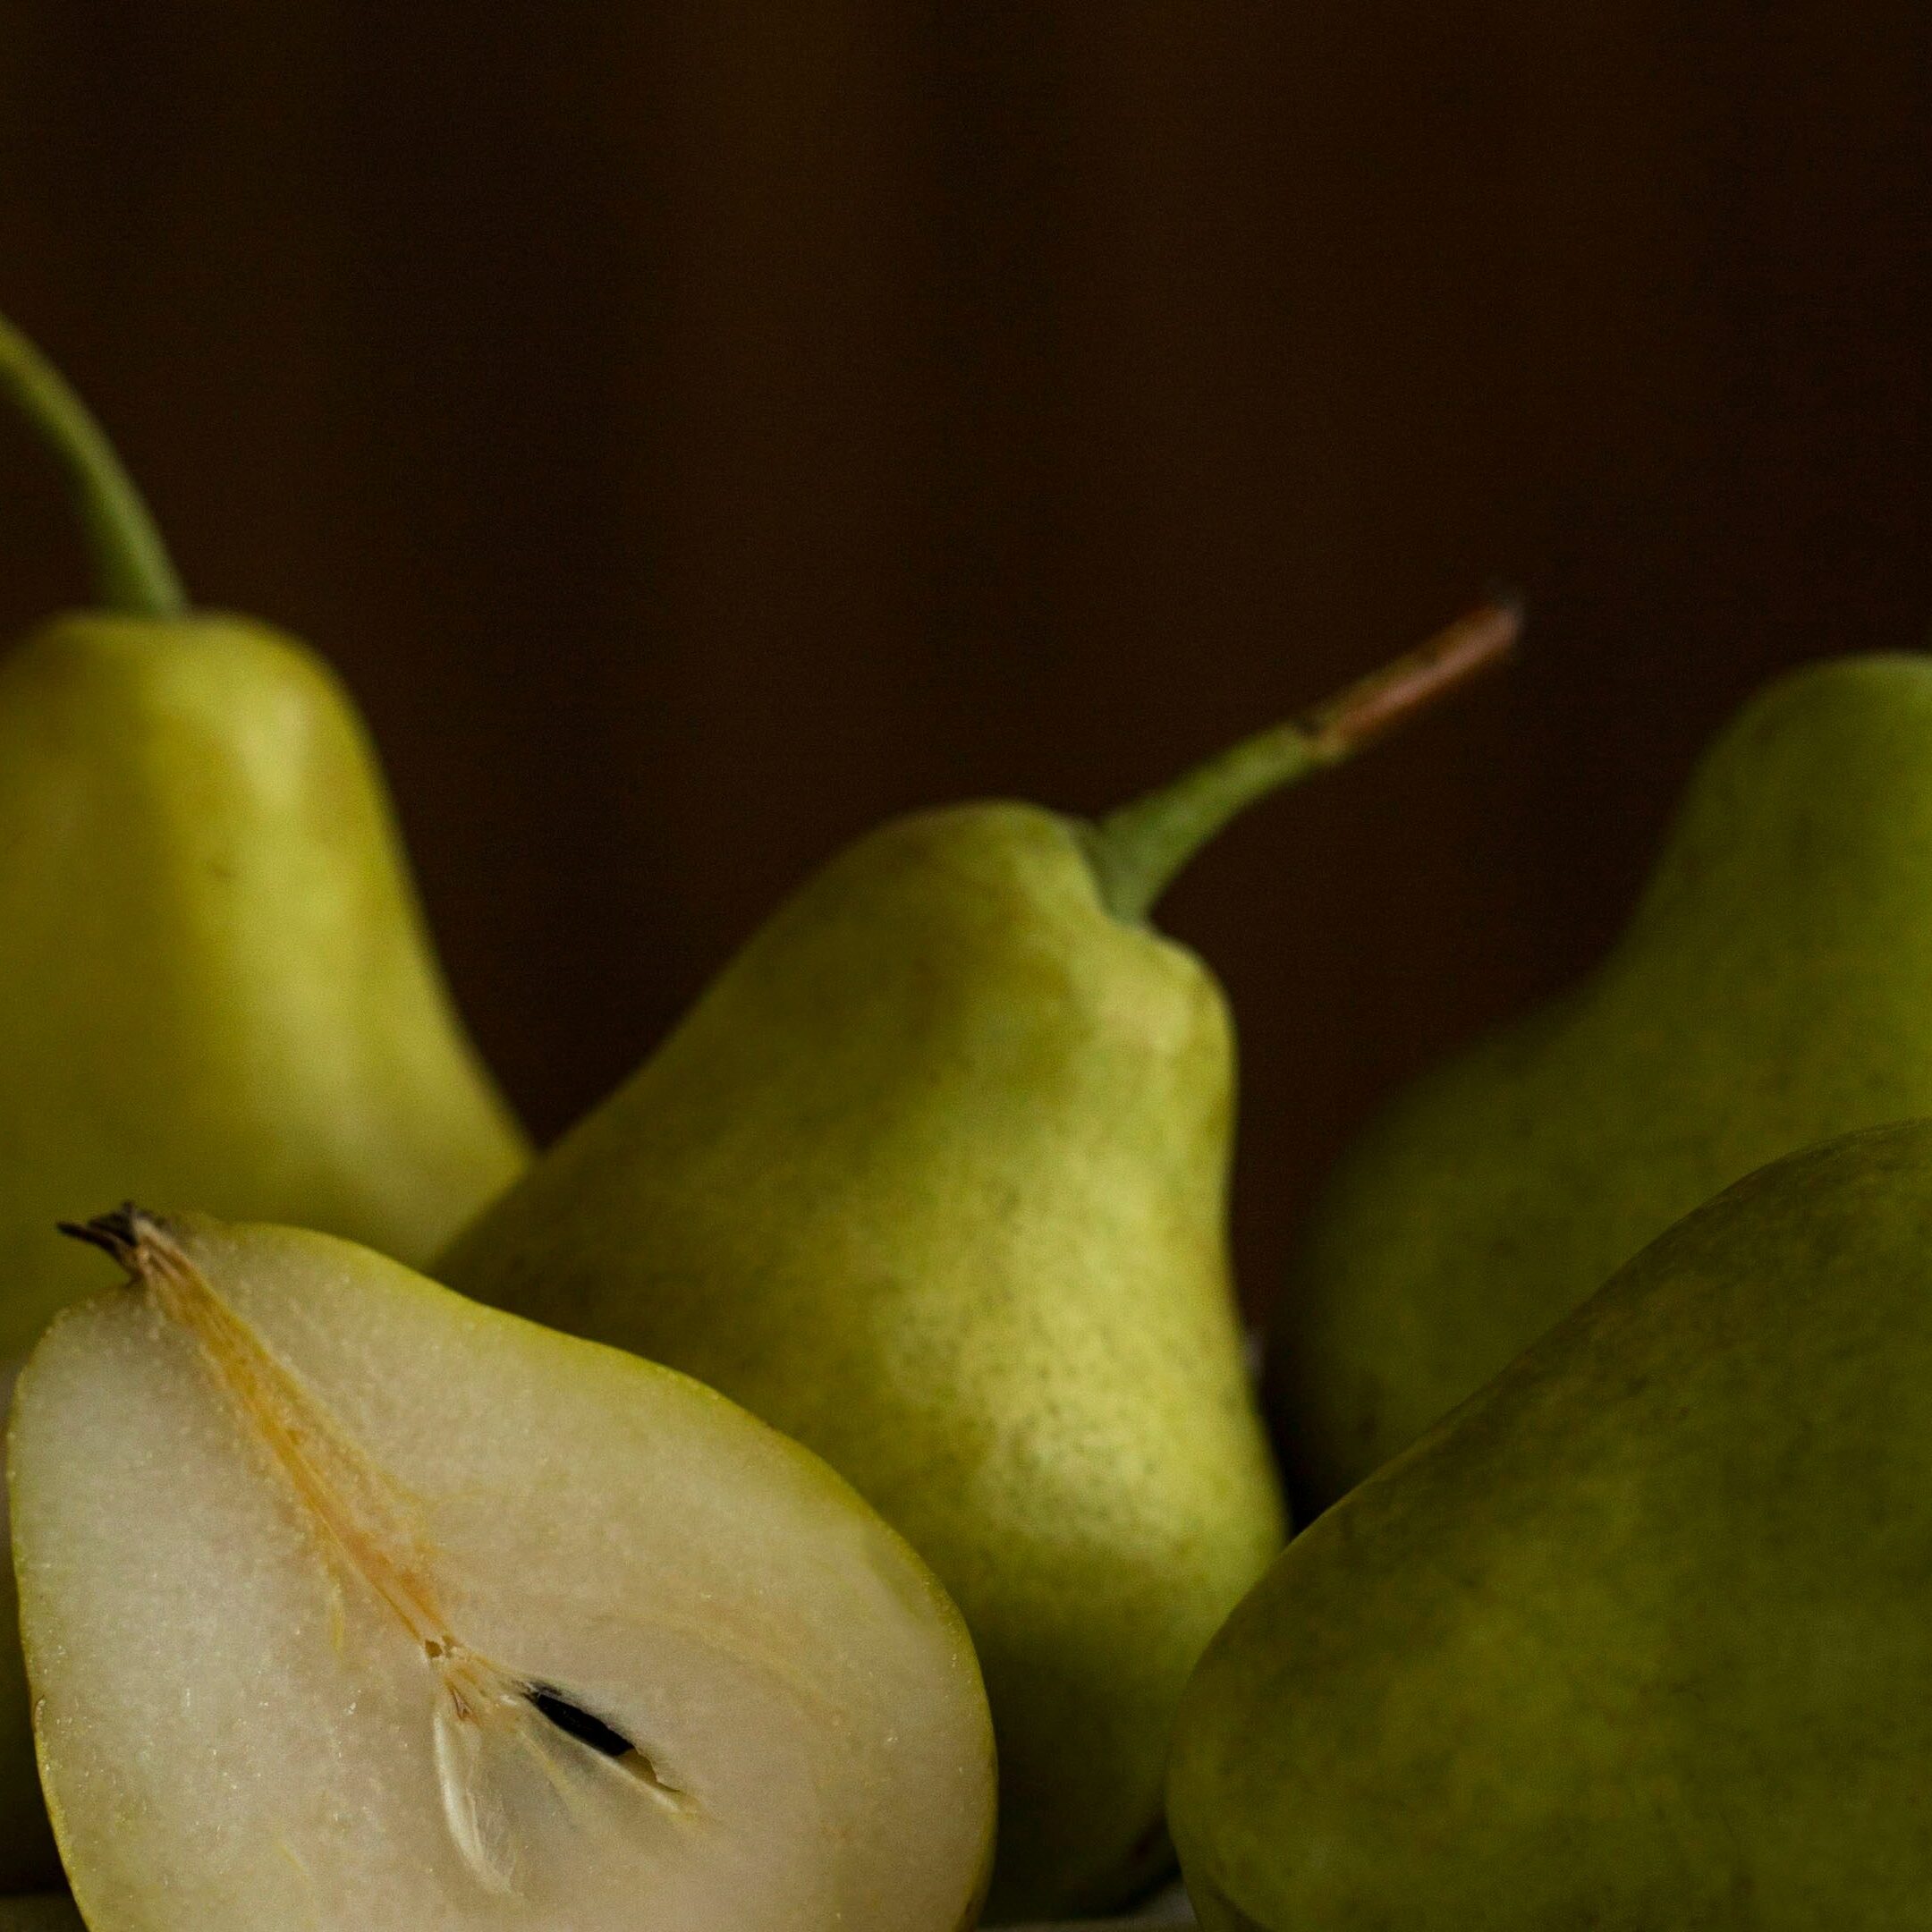 Pears : Fruits for kidney